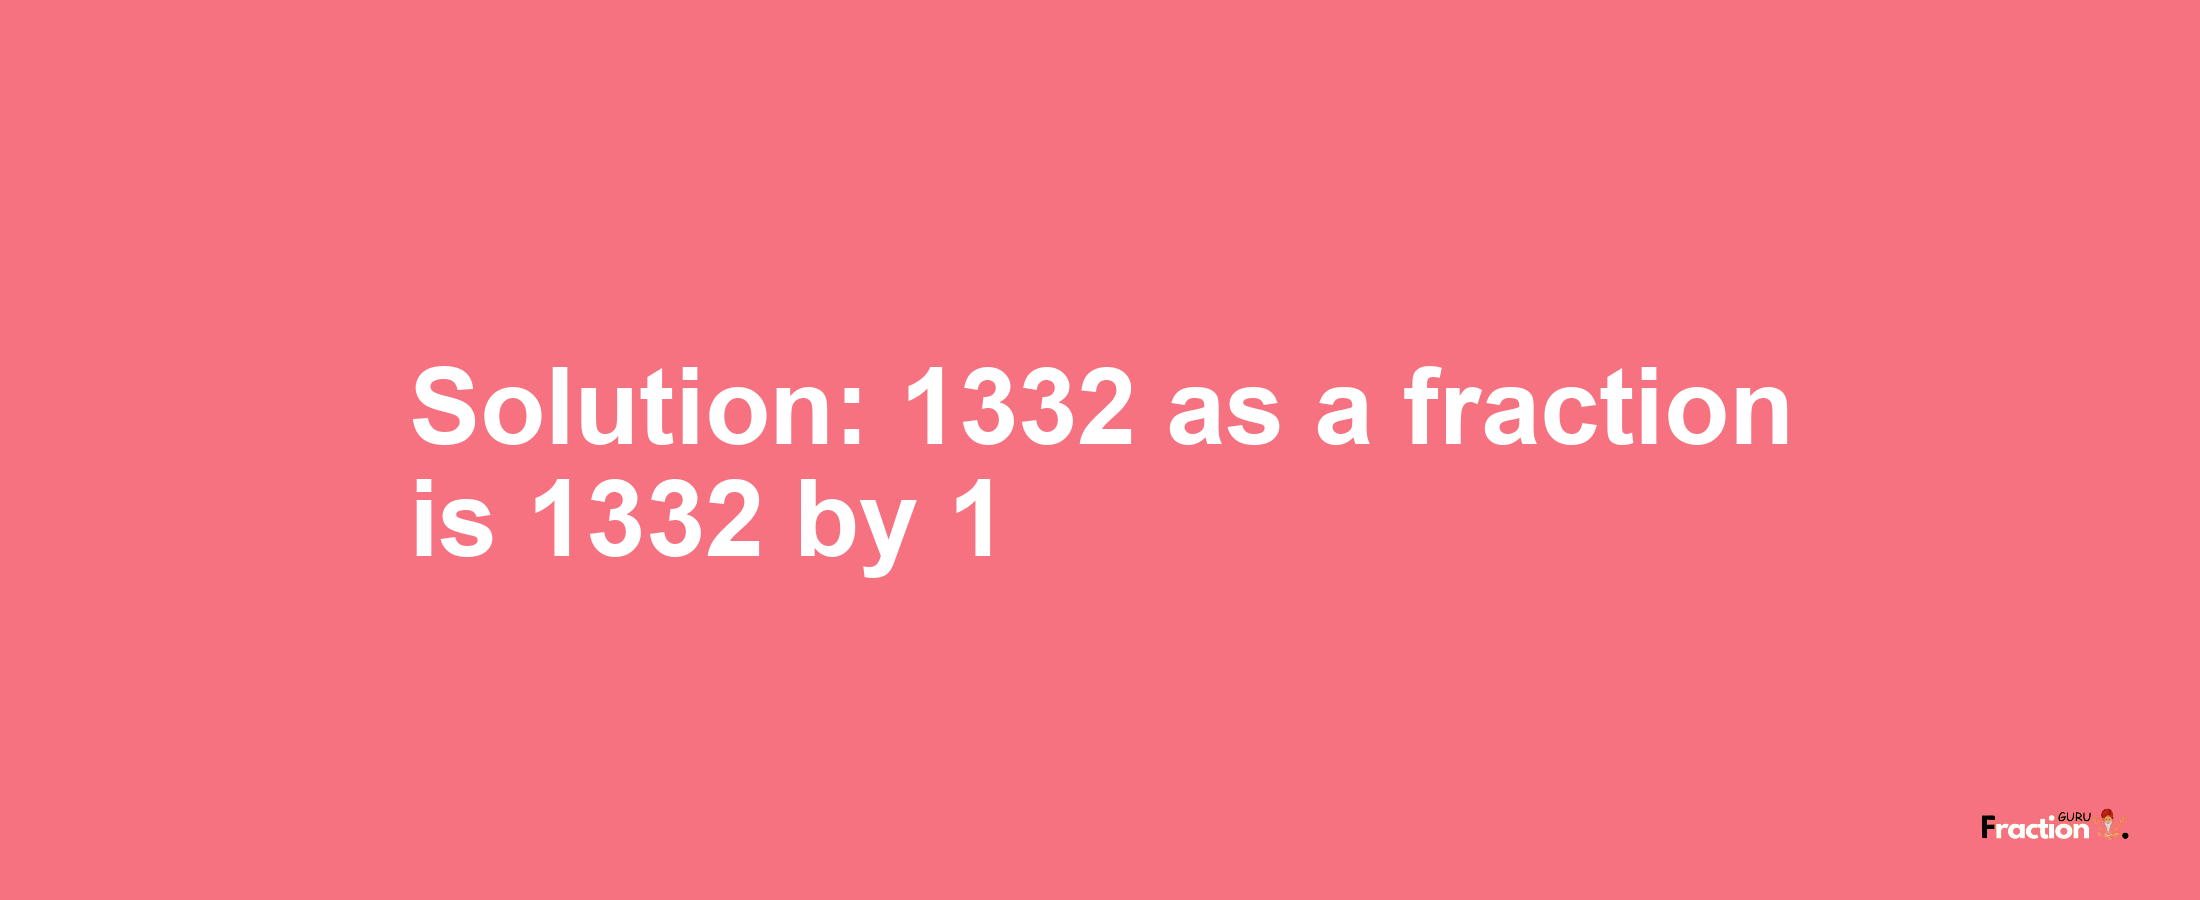 Solution:1332 as a fraction is 1332/1